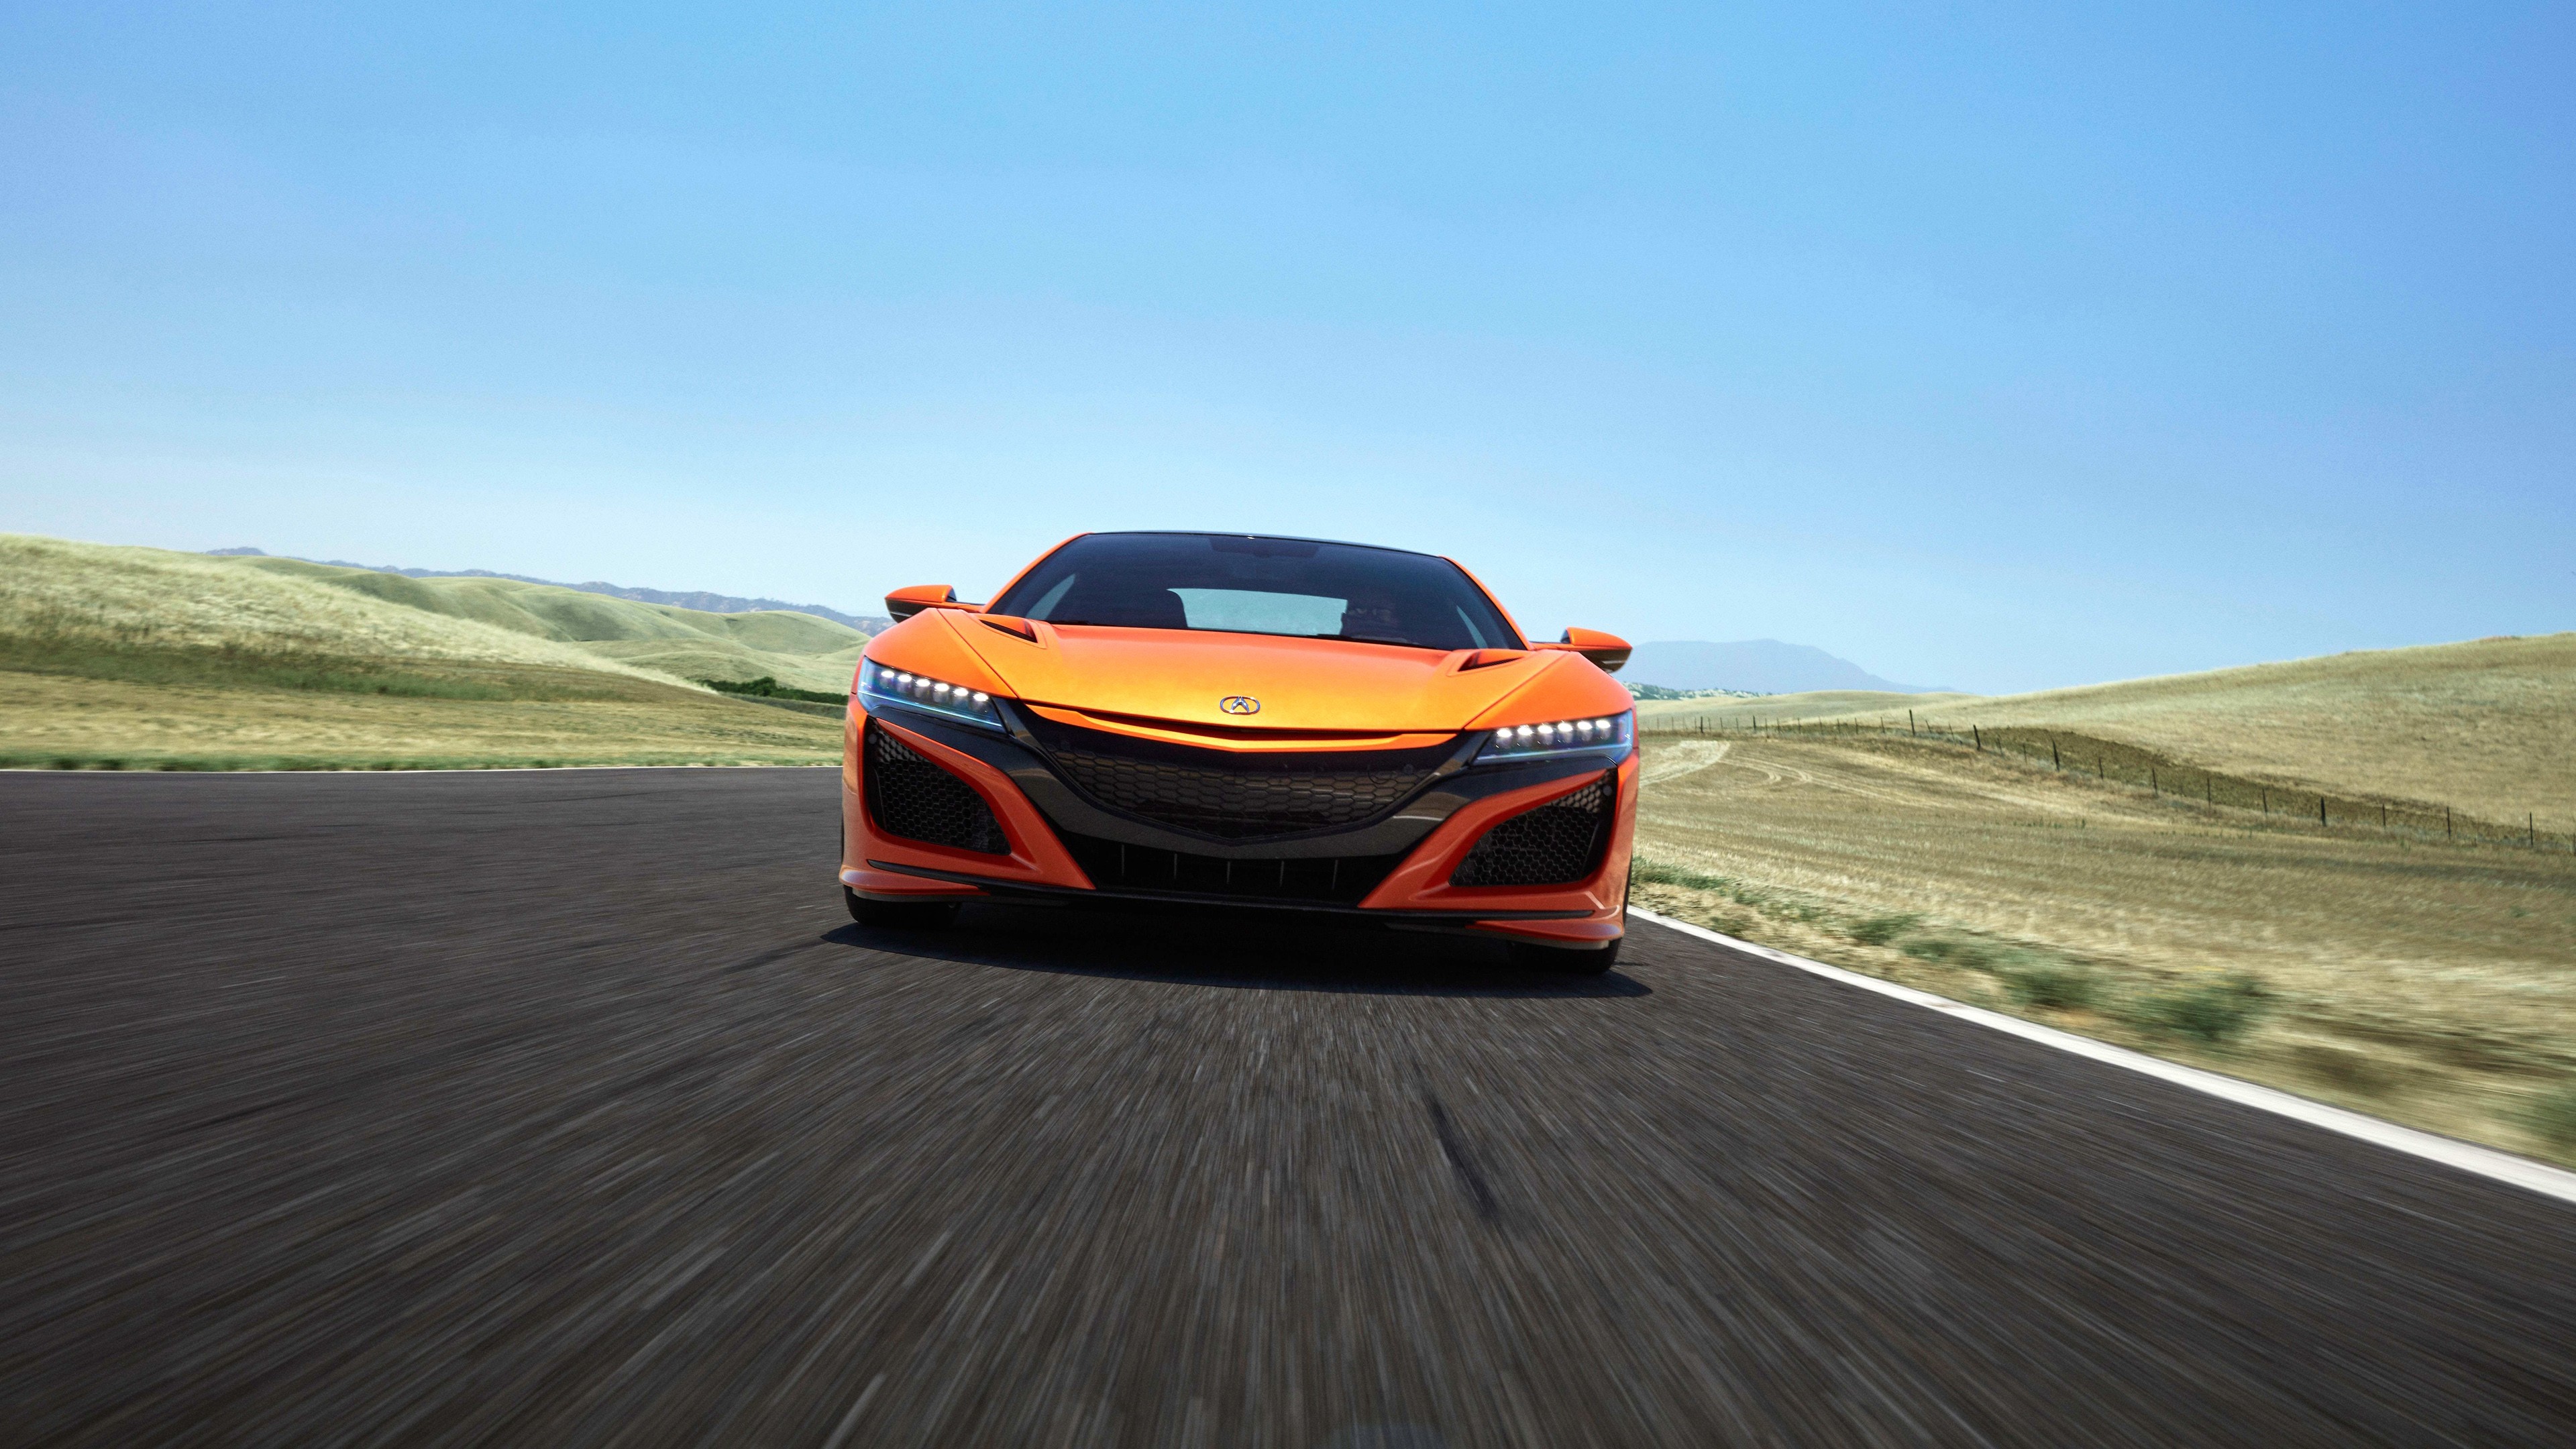 19 Acura Nsx Acura Cars Acura Nsx Sports Car Wallpaper For Iphone 6 6s 7 8 750x1334 Cars Picture Background And Image